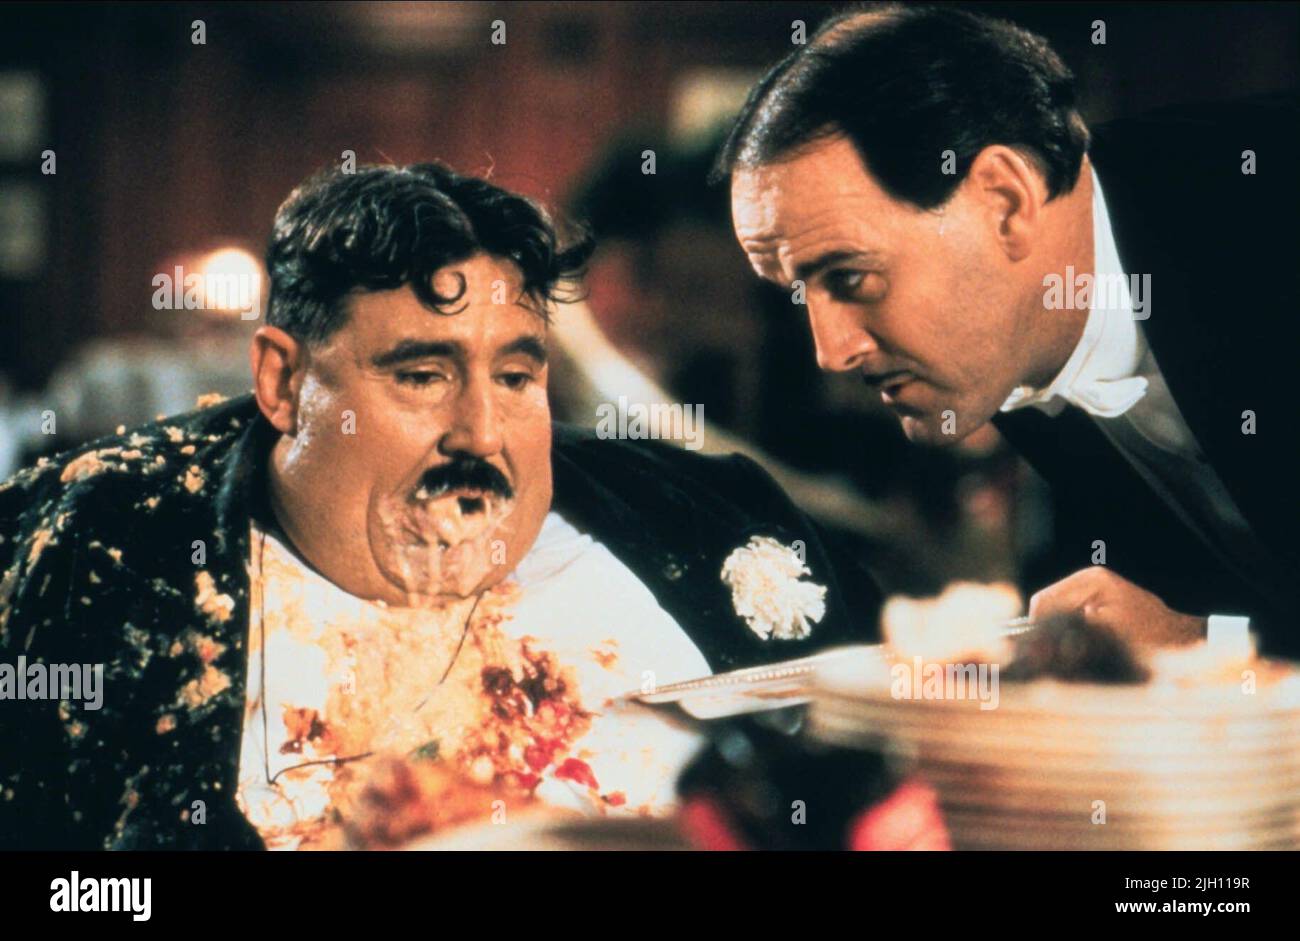 JONES,CLEESE, MONTY PYTHON'S THE MEANING OF LIFE, 1983 Stock Photo